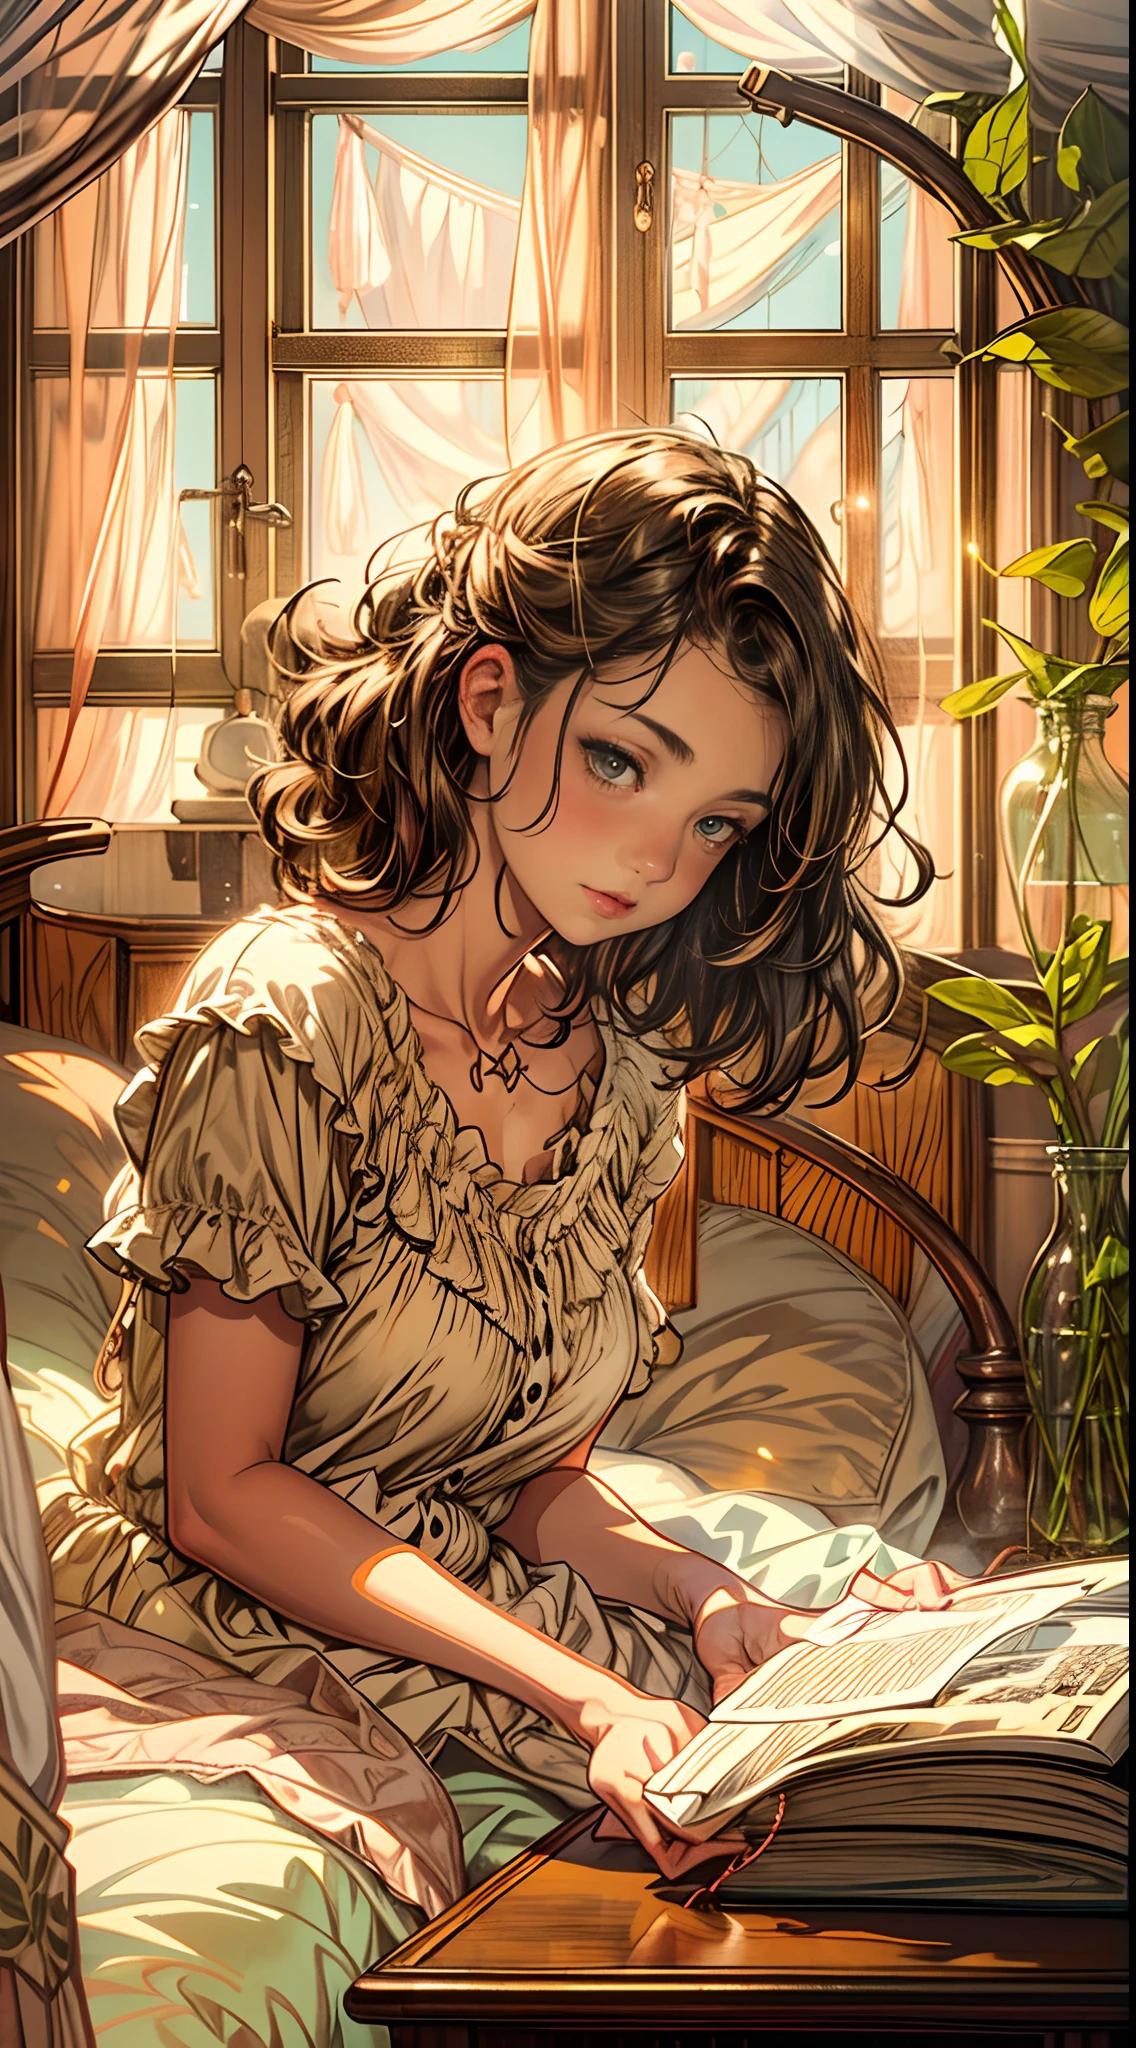 A girl is reclining on the bed, her head tilted slightly to the side, her feet elegantly crossed at the ankles, a book held delicately in her hands, the soft glow of a bedside lamp casting a warm pool of light on the pages, her expression one of quiet contemplation, the room adorned with vintage decor and earthy colors, invoking a sense of nostalgia and intellectual tranquility, Illustration, digital painting, warm color palette with subtle sepia tones